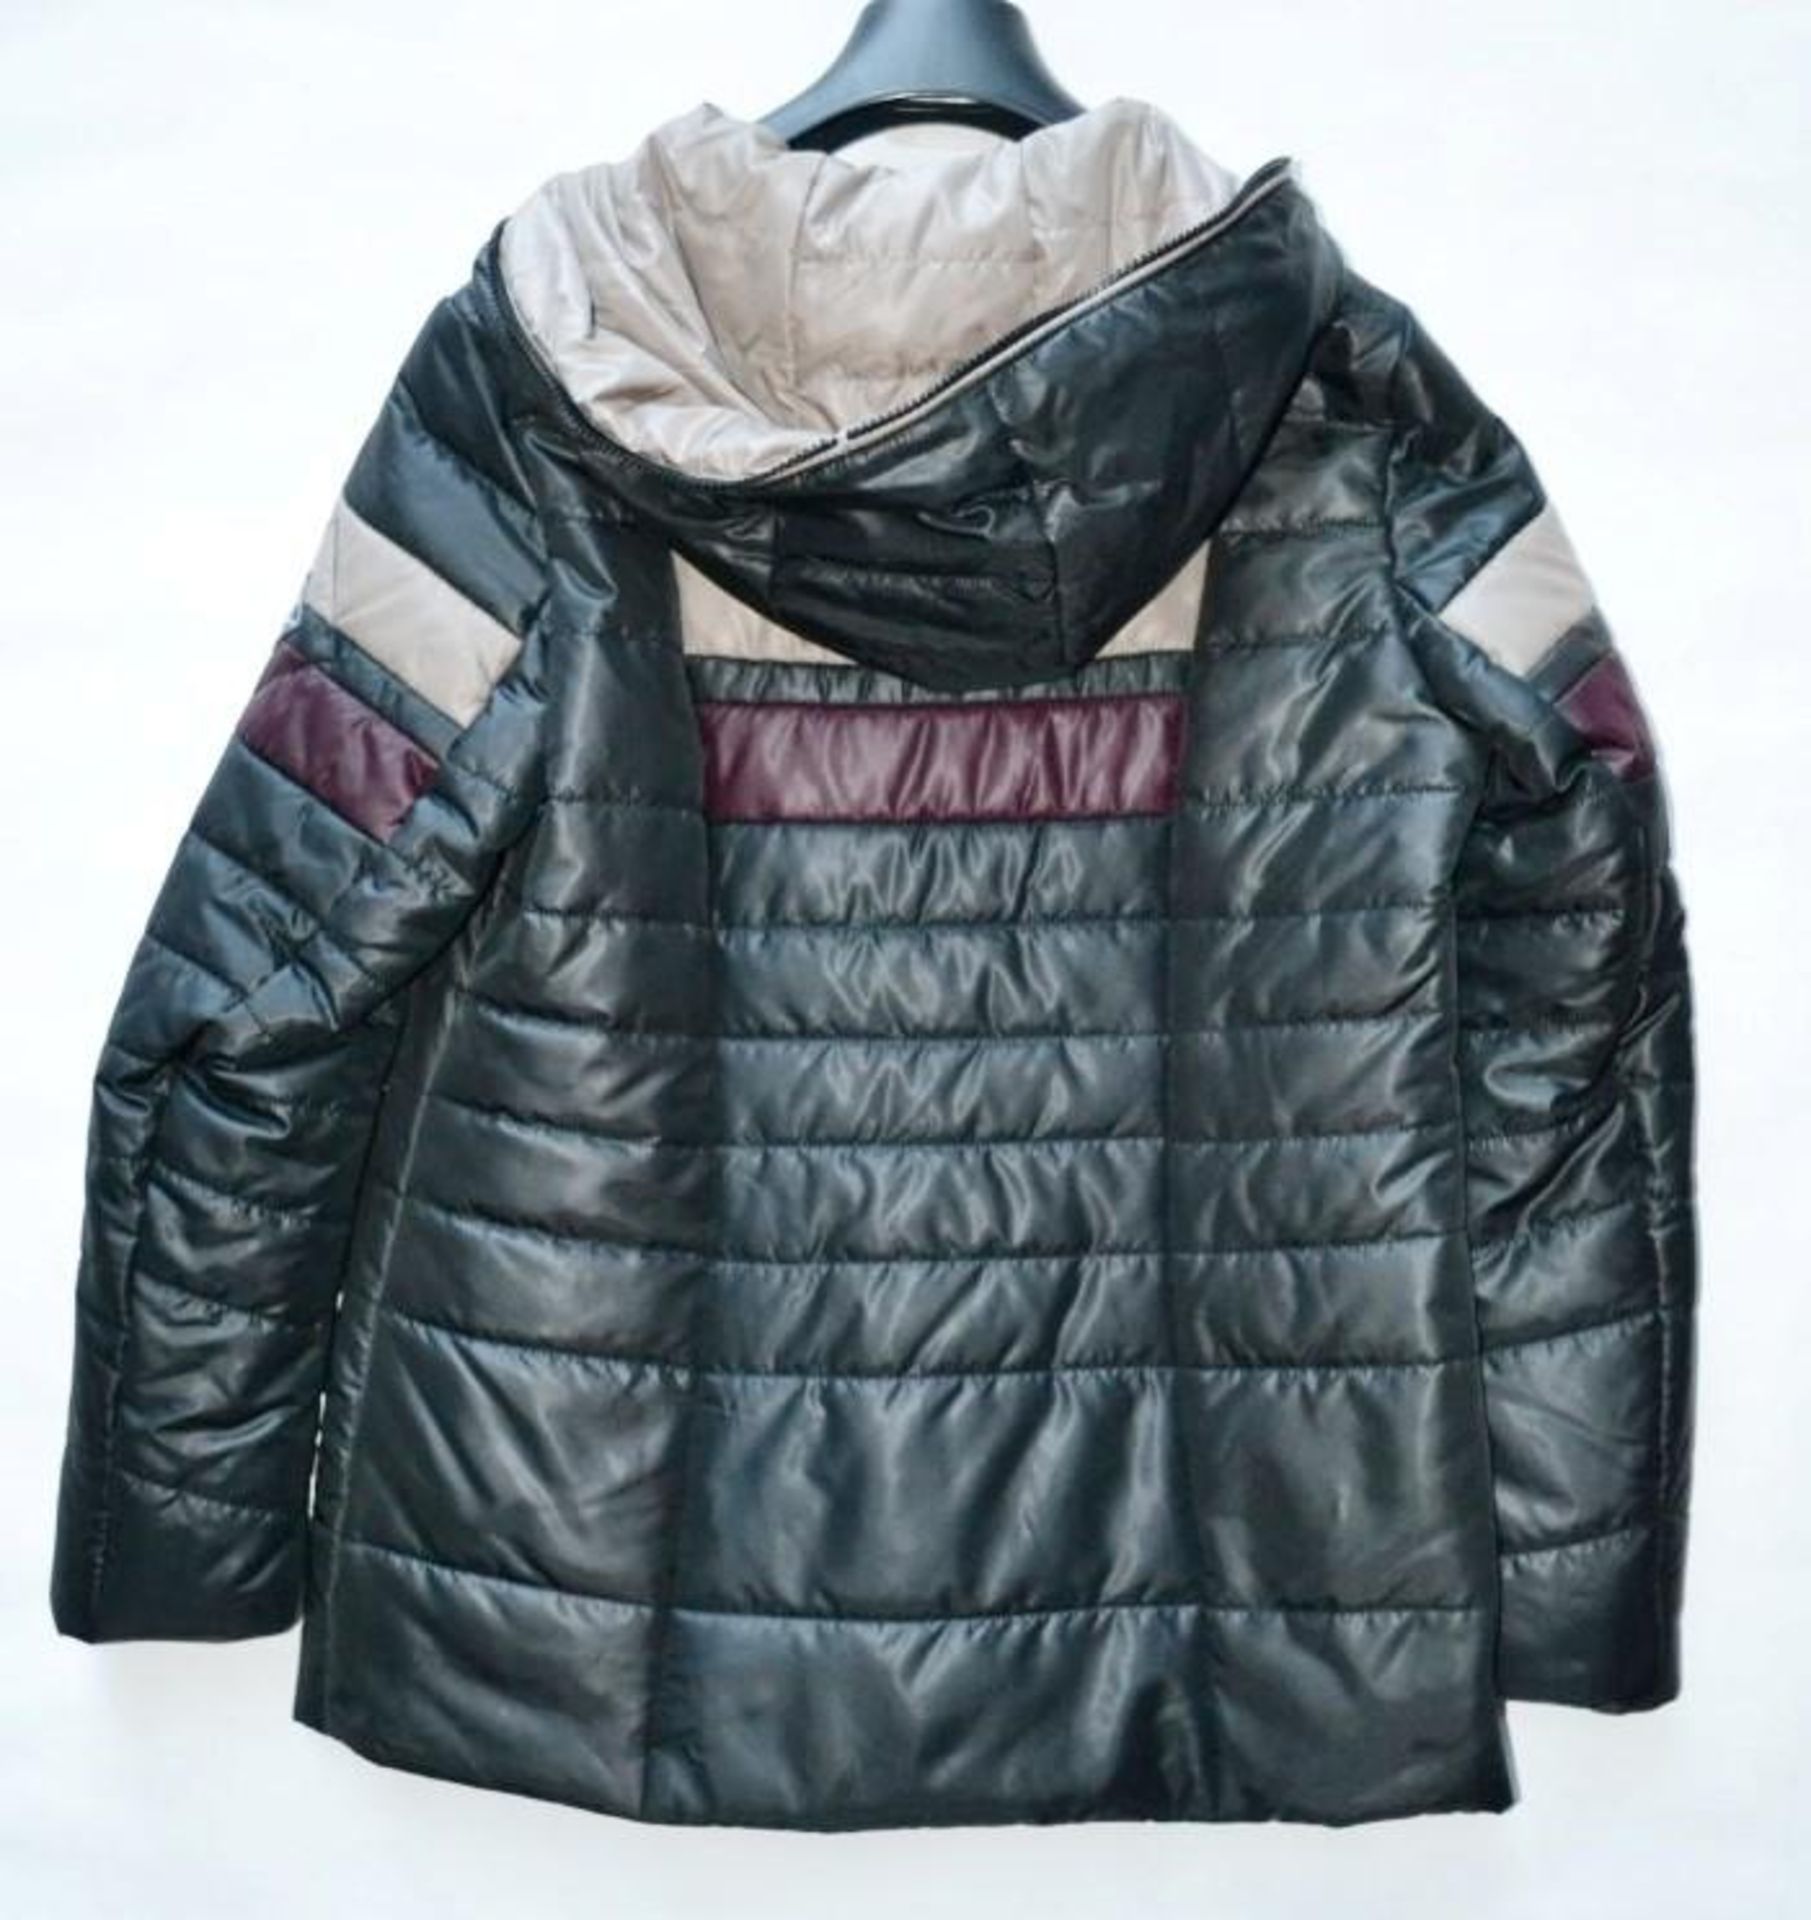 1 x Premium Branded Womens Padded Winter Coat - Features Detachable Zipped Hood - Colour: Purple / B - Image 3 of 6